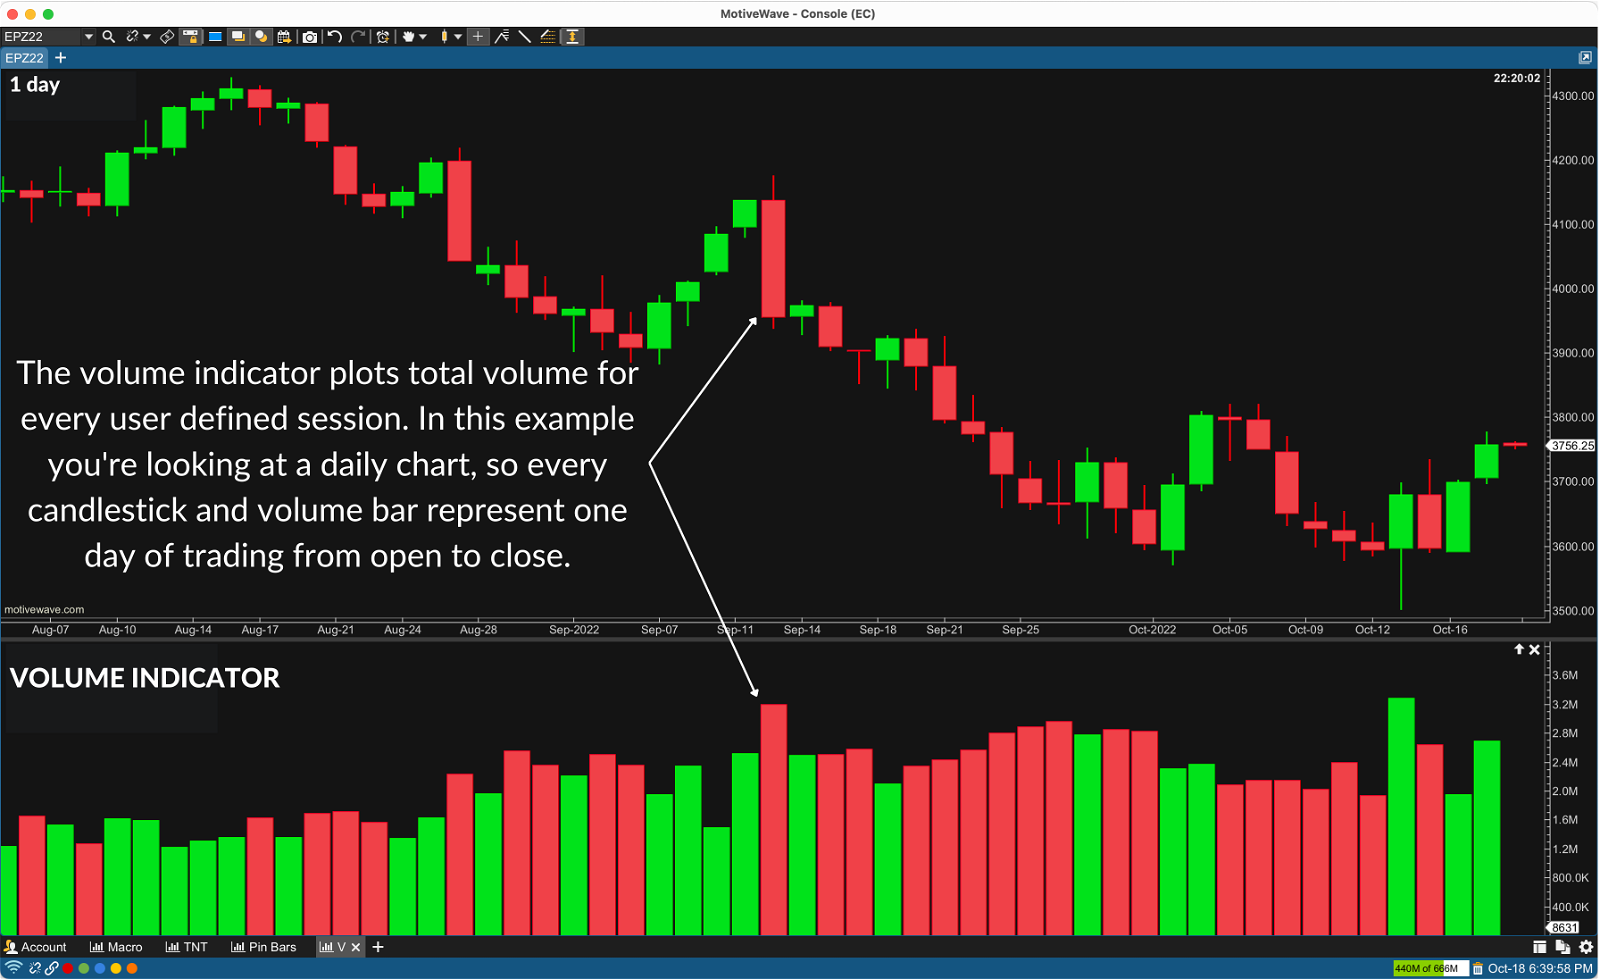 Daily Chart of eMini=S&P 500 with Volume Indicator